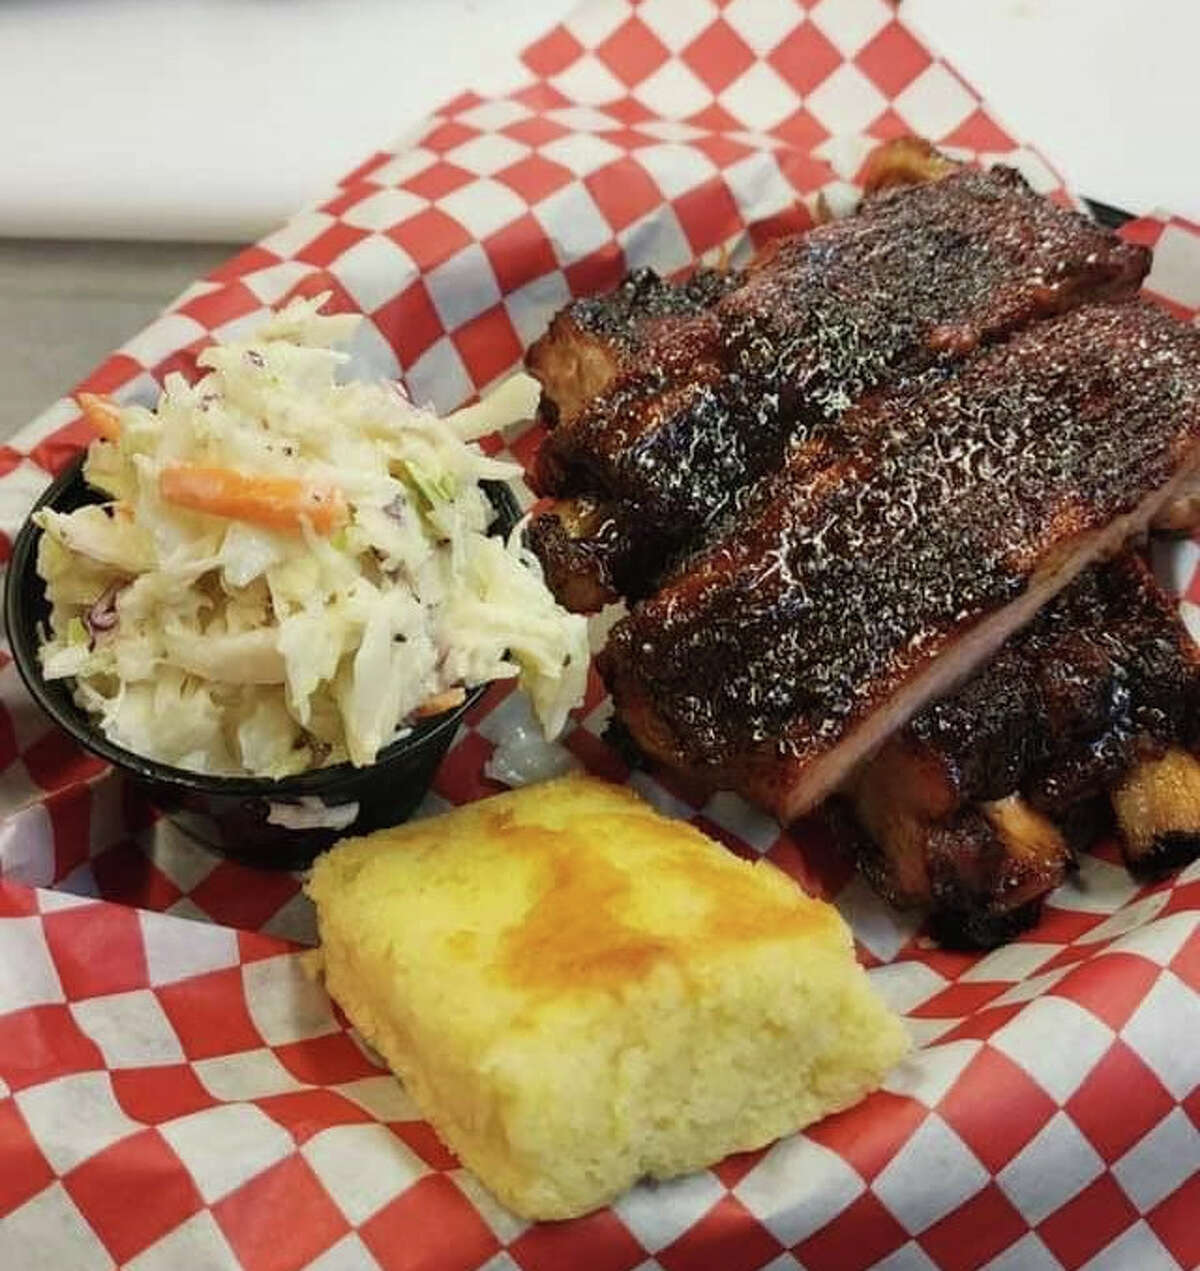 Ribs are among the smoked meats available from Miller's Backyard BBQ, formerly a Washington County-based food truck that has taken over the former Pig Pit BBQ building at 1 Niver St. in Cohoes, alongside I-787.